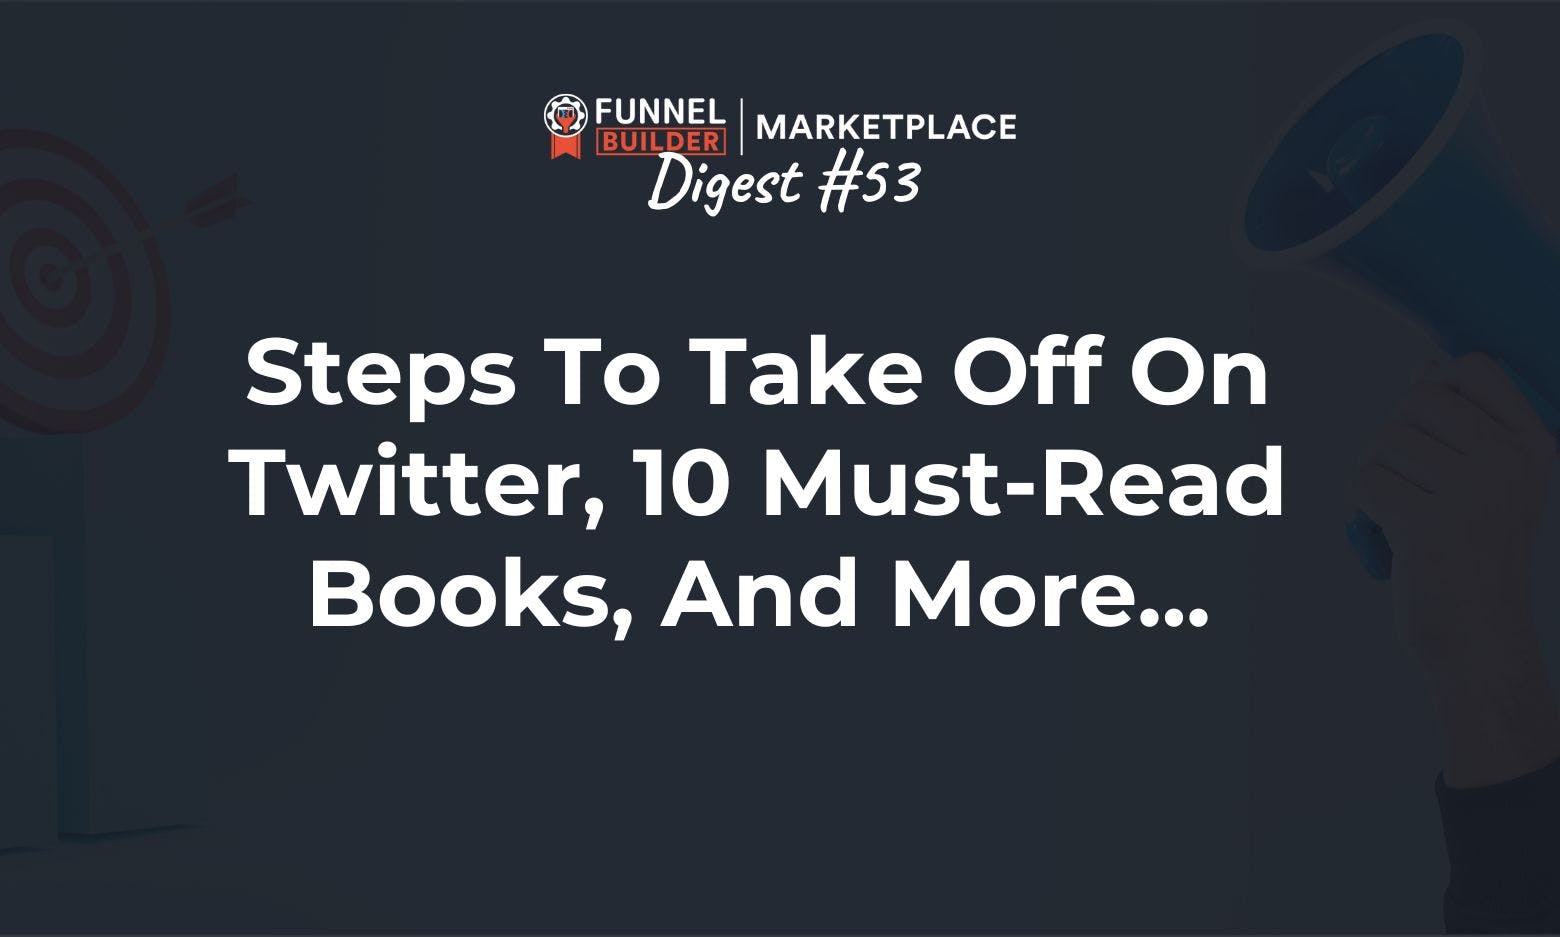 FBM Digest #53: Steps to take off on Twitter, 10 must-read books, and more...